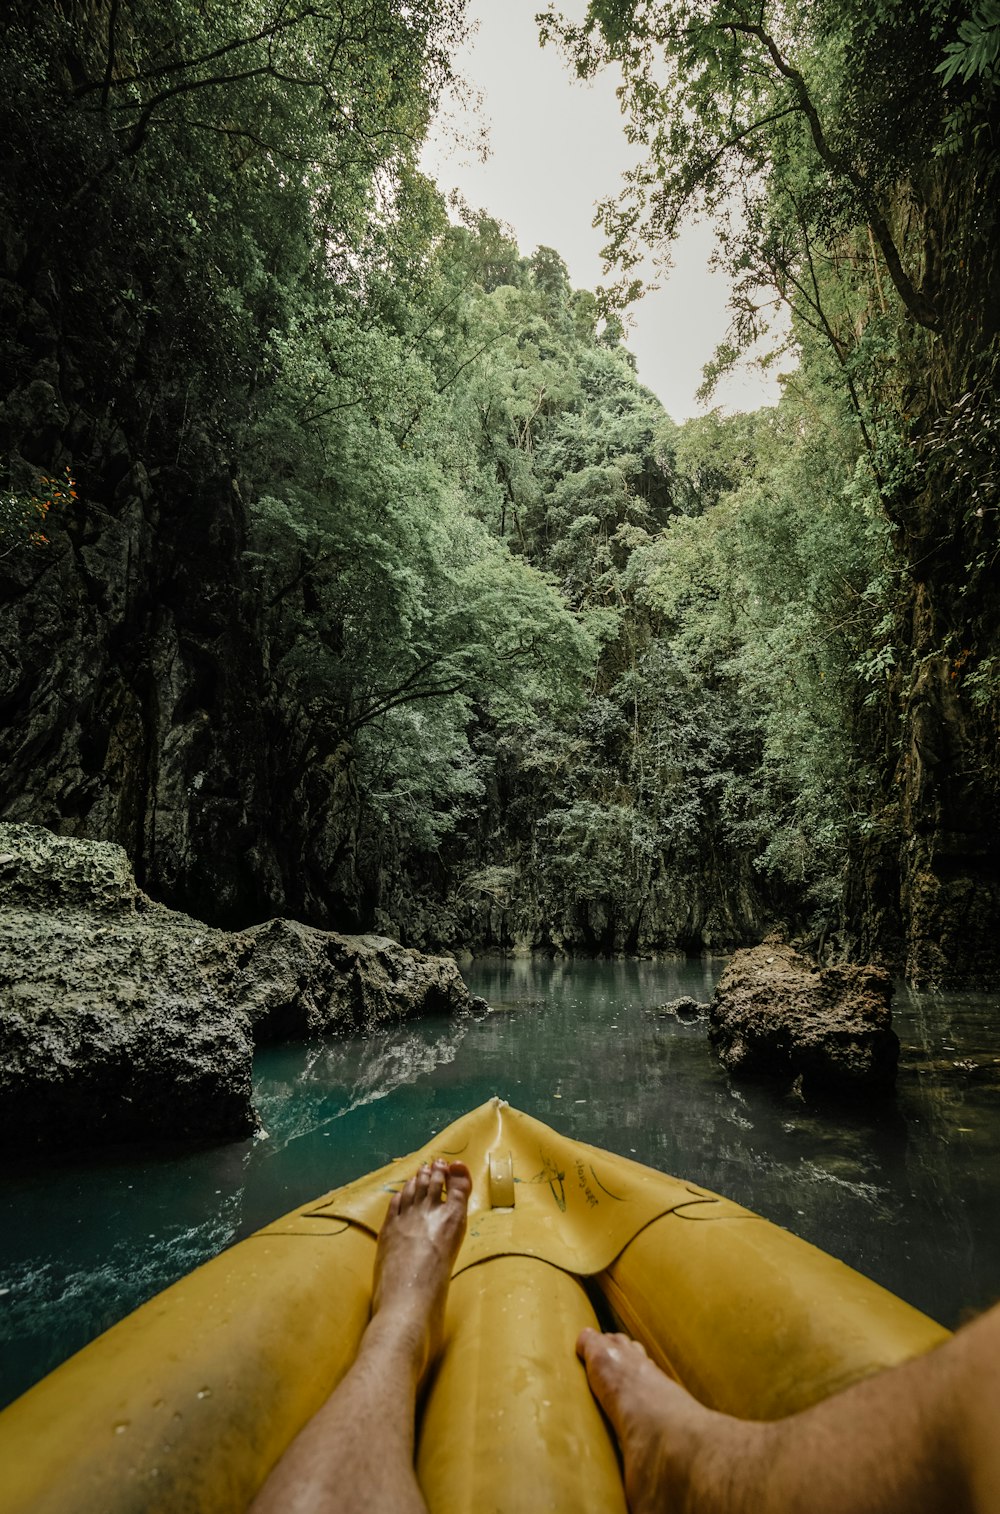 a person's feet on a yellow kayak in a river